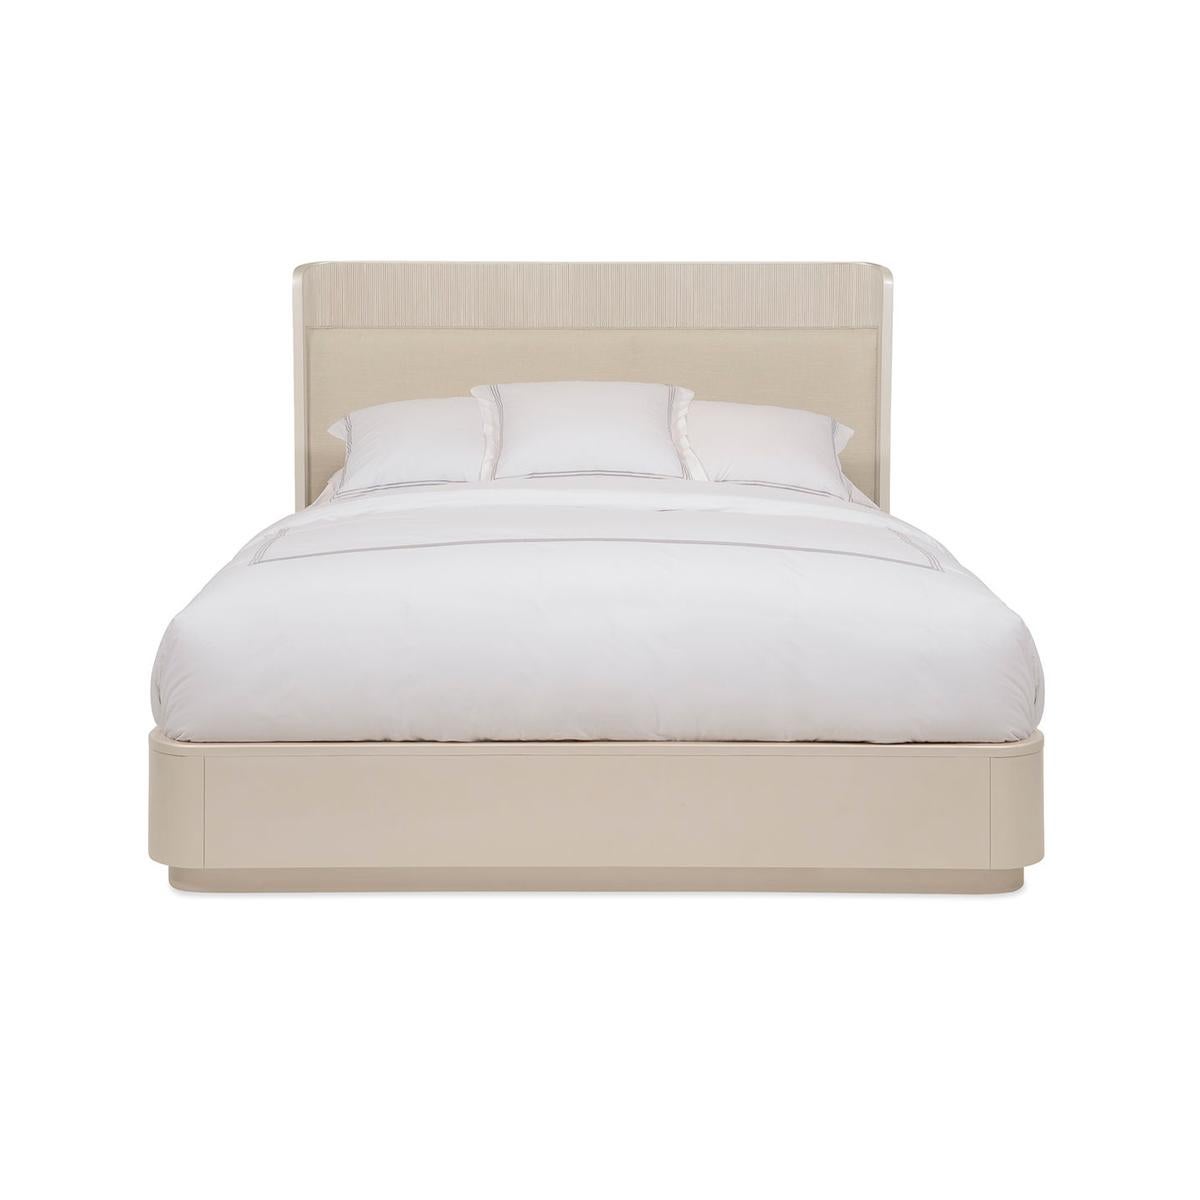 With a softly curved headboard that ensconces you in style, it boasts a thoughtful combination of luxe materials. As you lay back and rest your head, you’ll enjoy the soft support of an exquisitely upholstered headboard framed with wood trim